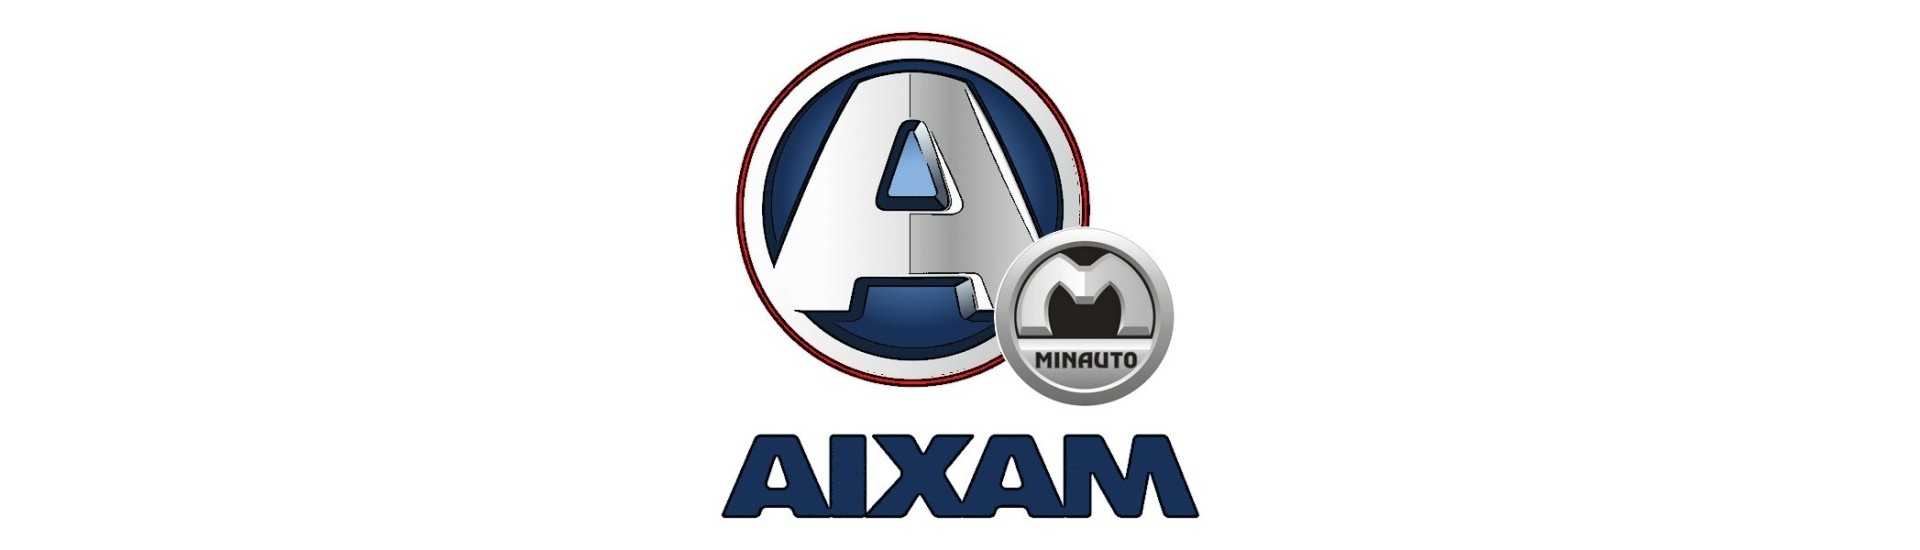 Brake drum at the best car price without a permit Aixam Minauto